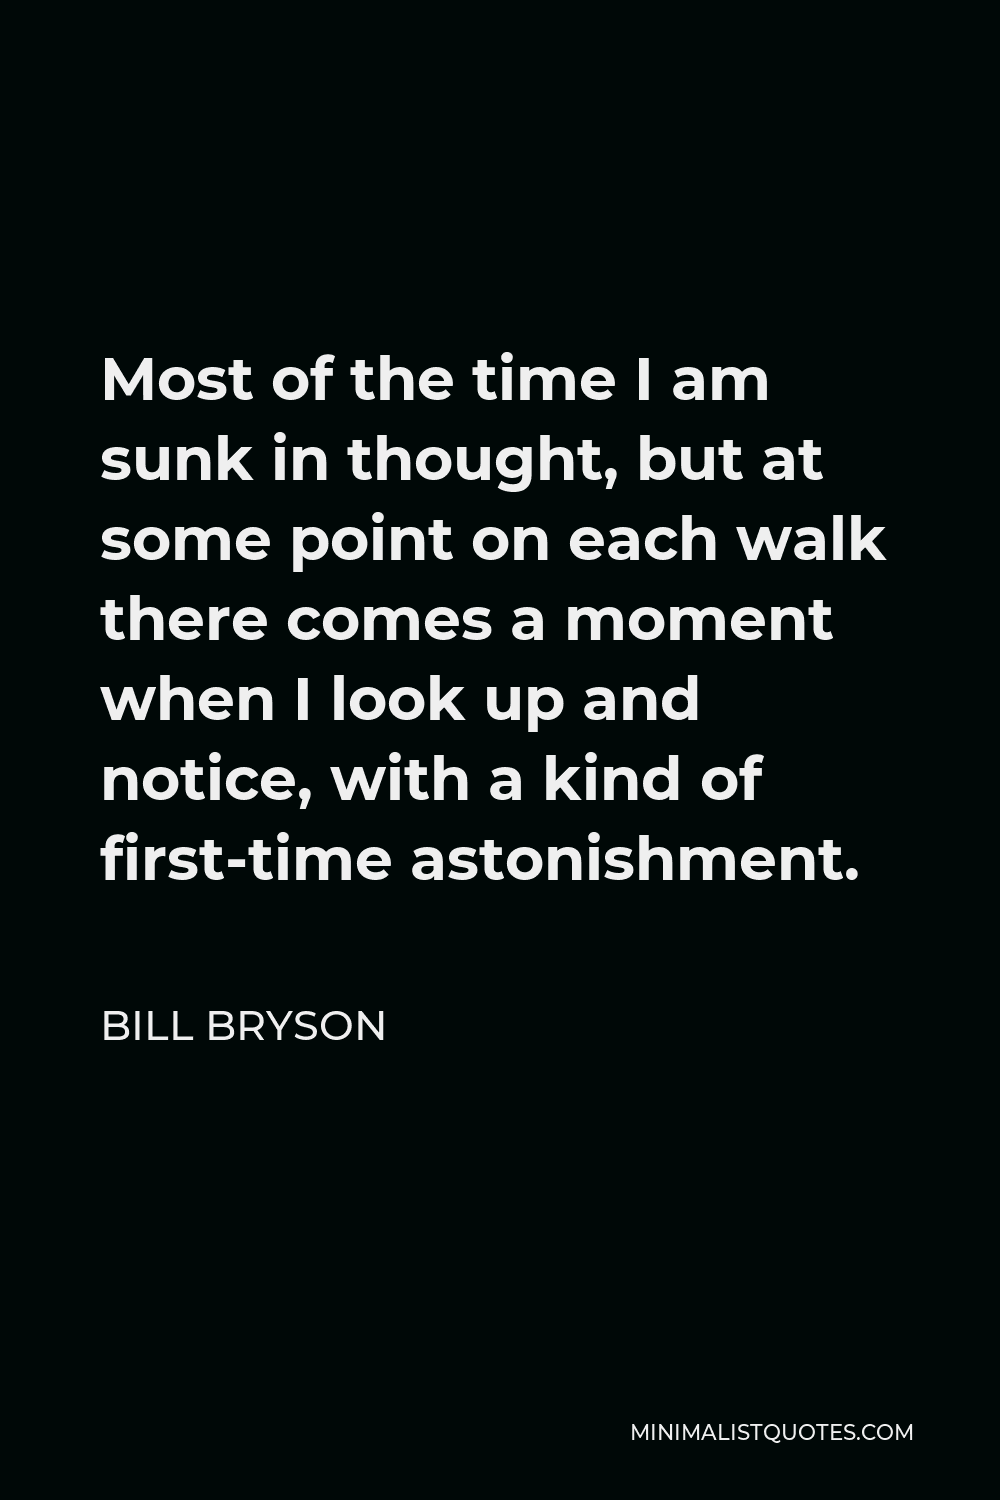 Bill Bryson Quote - Most of the time I am sunk in thought, but at some point on each walk there comes a moment when I look up and notice, with a kind of first-time astonishment.